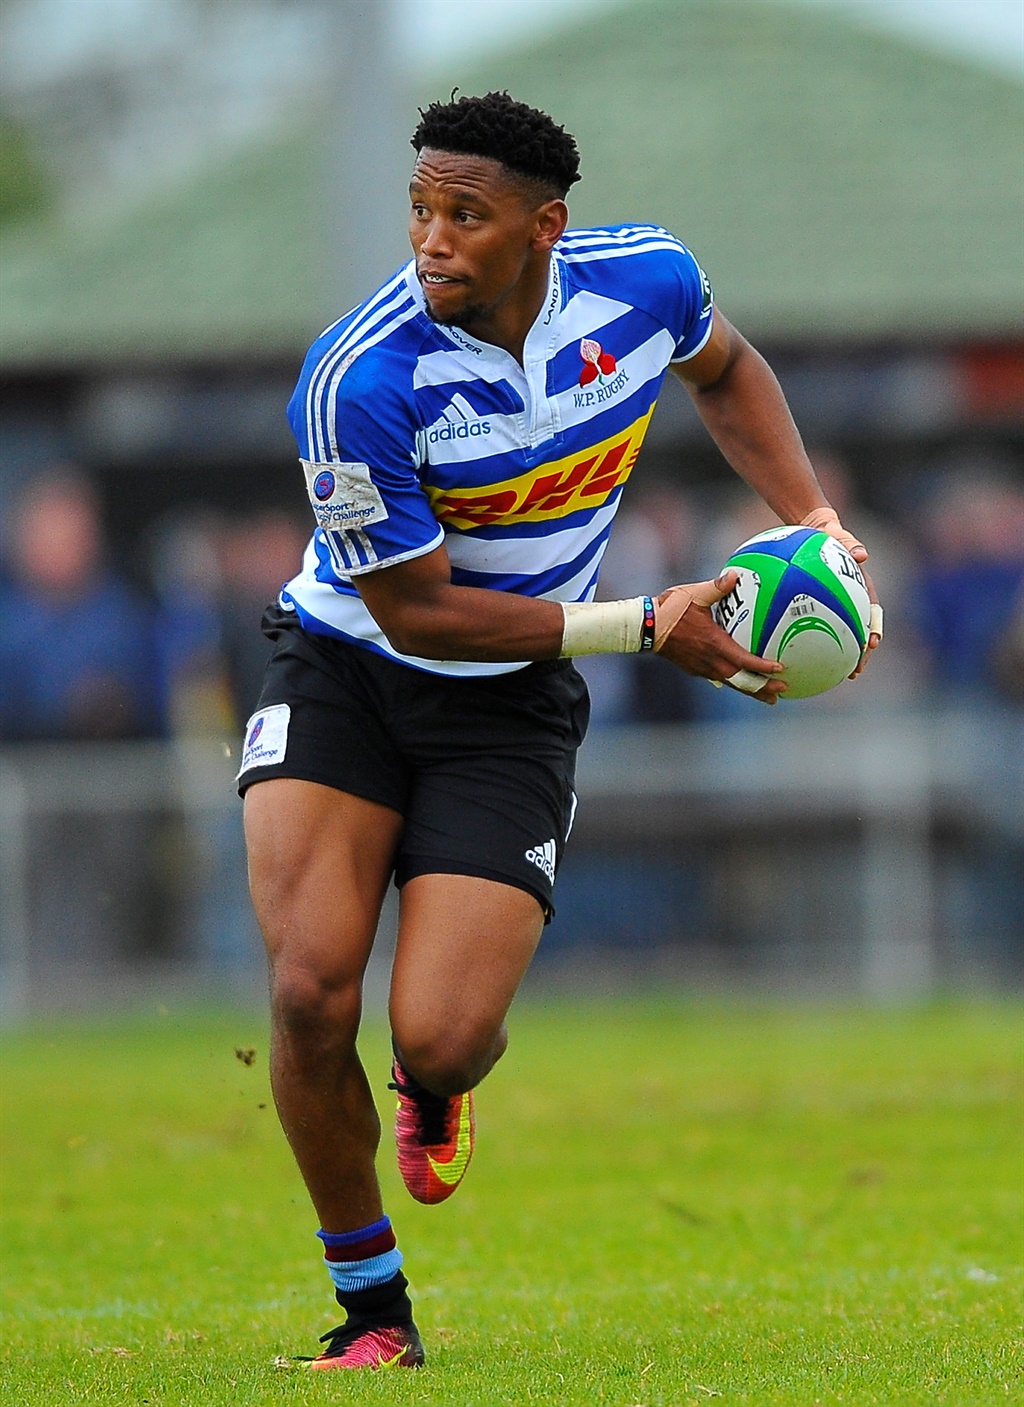 Western Province fullback Craig Barry finals record was starting to be something approaching a state of emergency